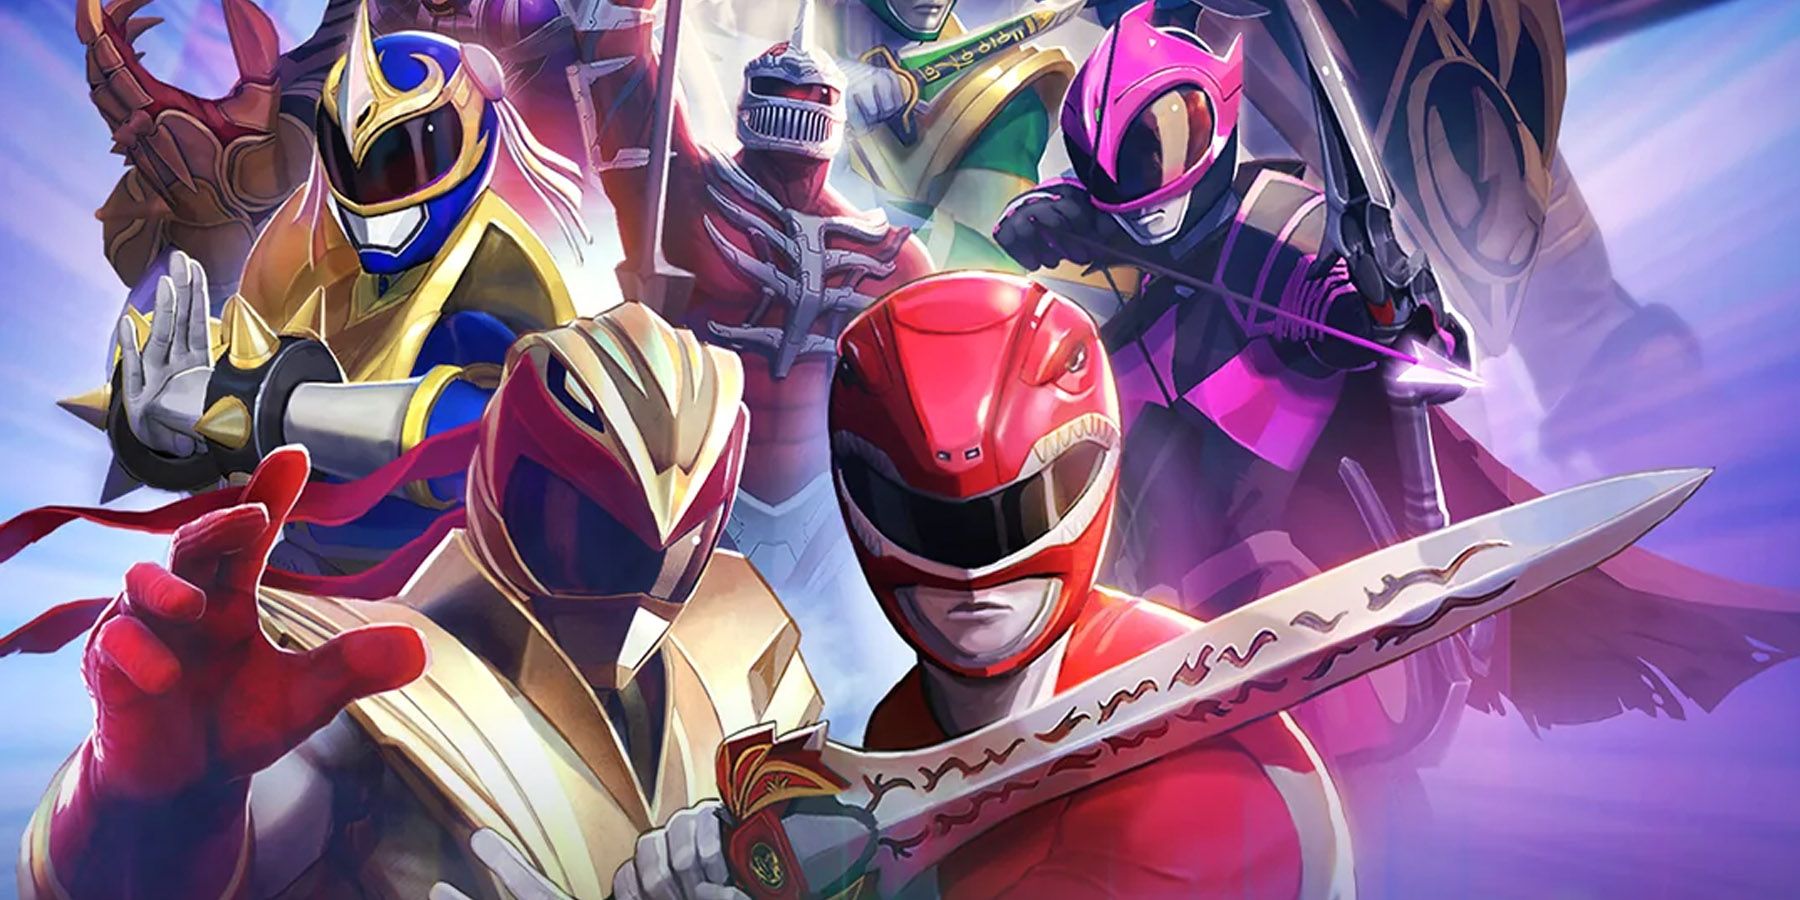 Red Ranger with sword and Ryu Ranger up front, with Chun-Li ranger and Ranger Slayer aiming her bow in the midground, and Lord Zedd in the background.